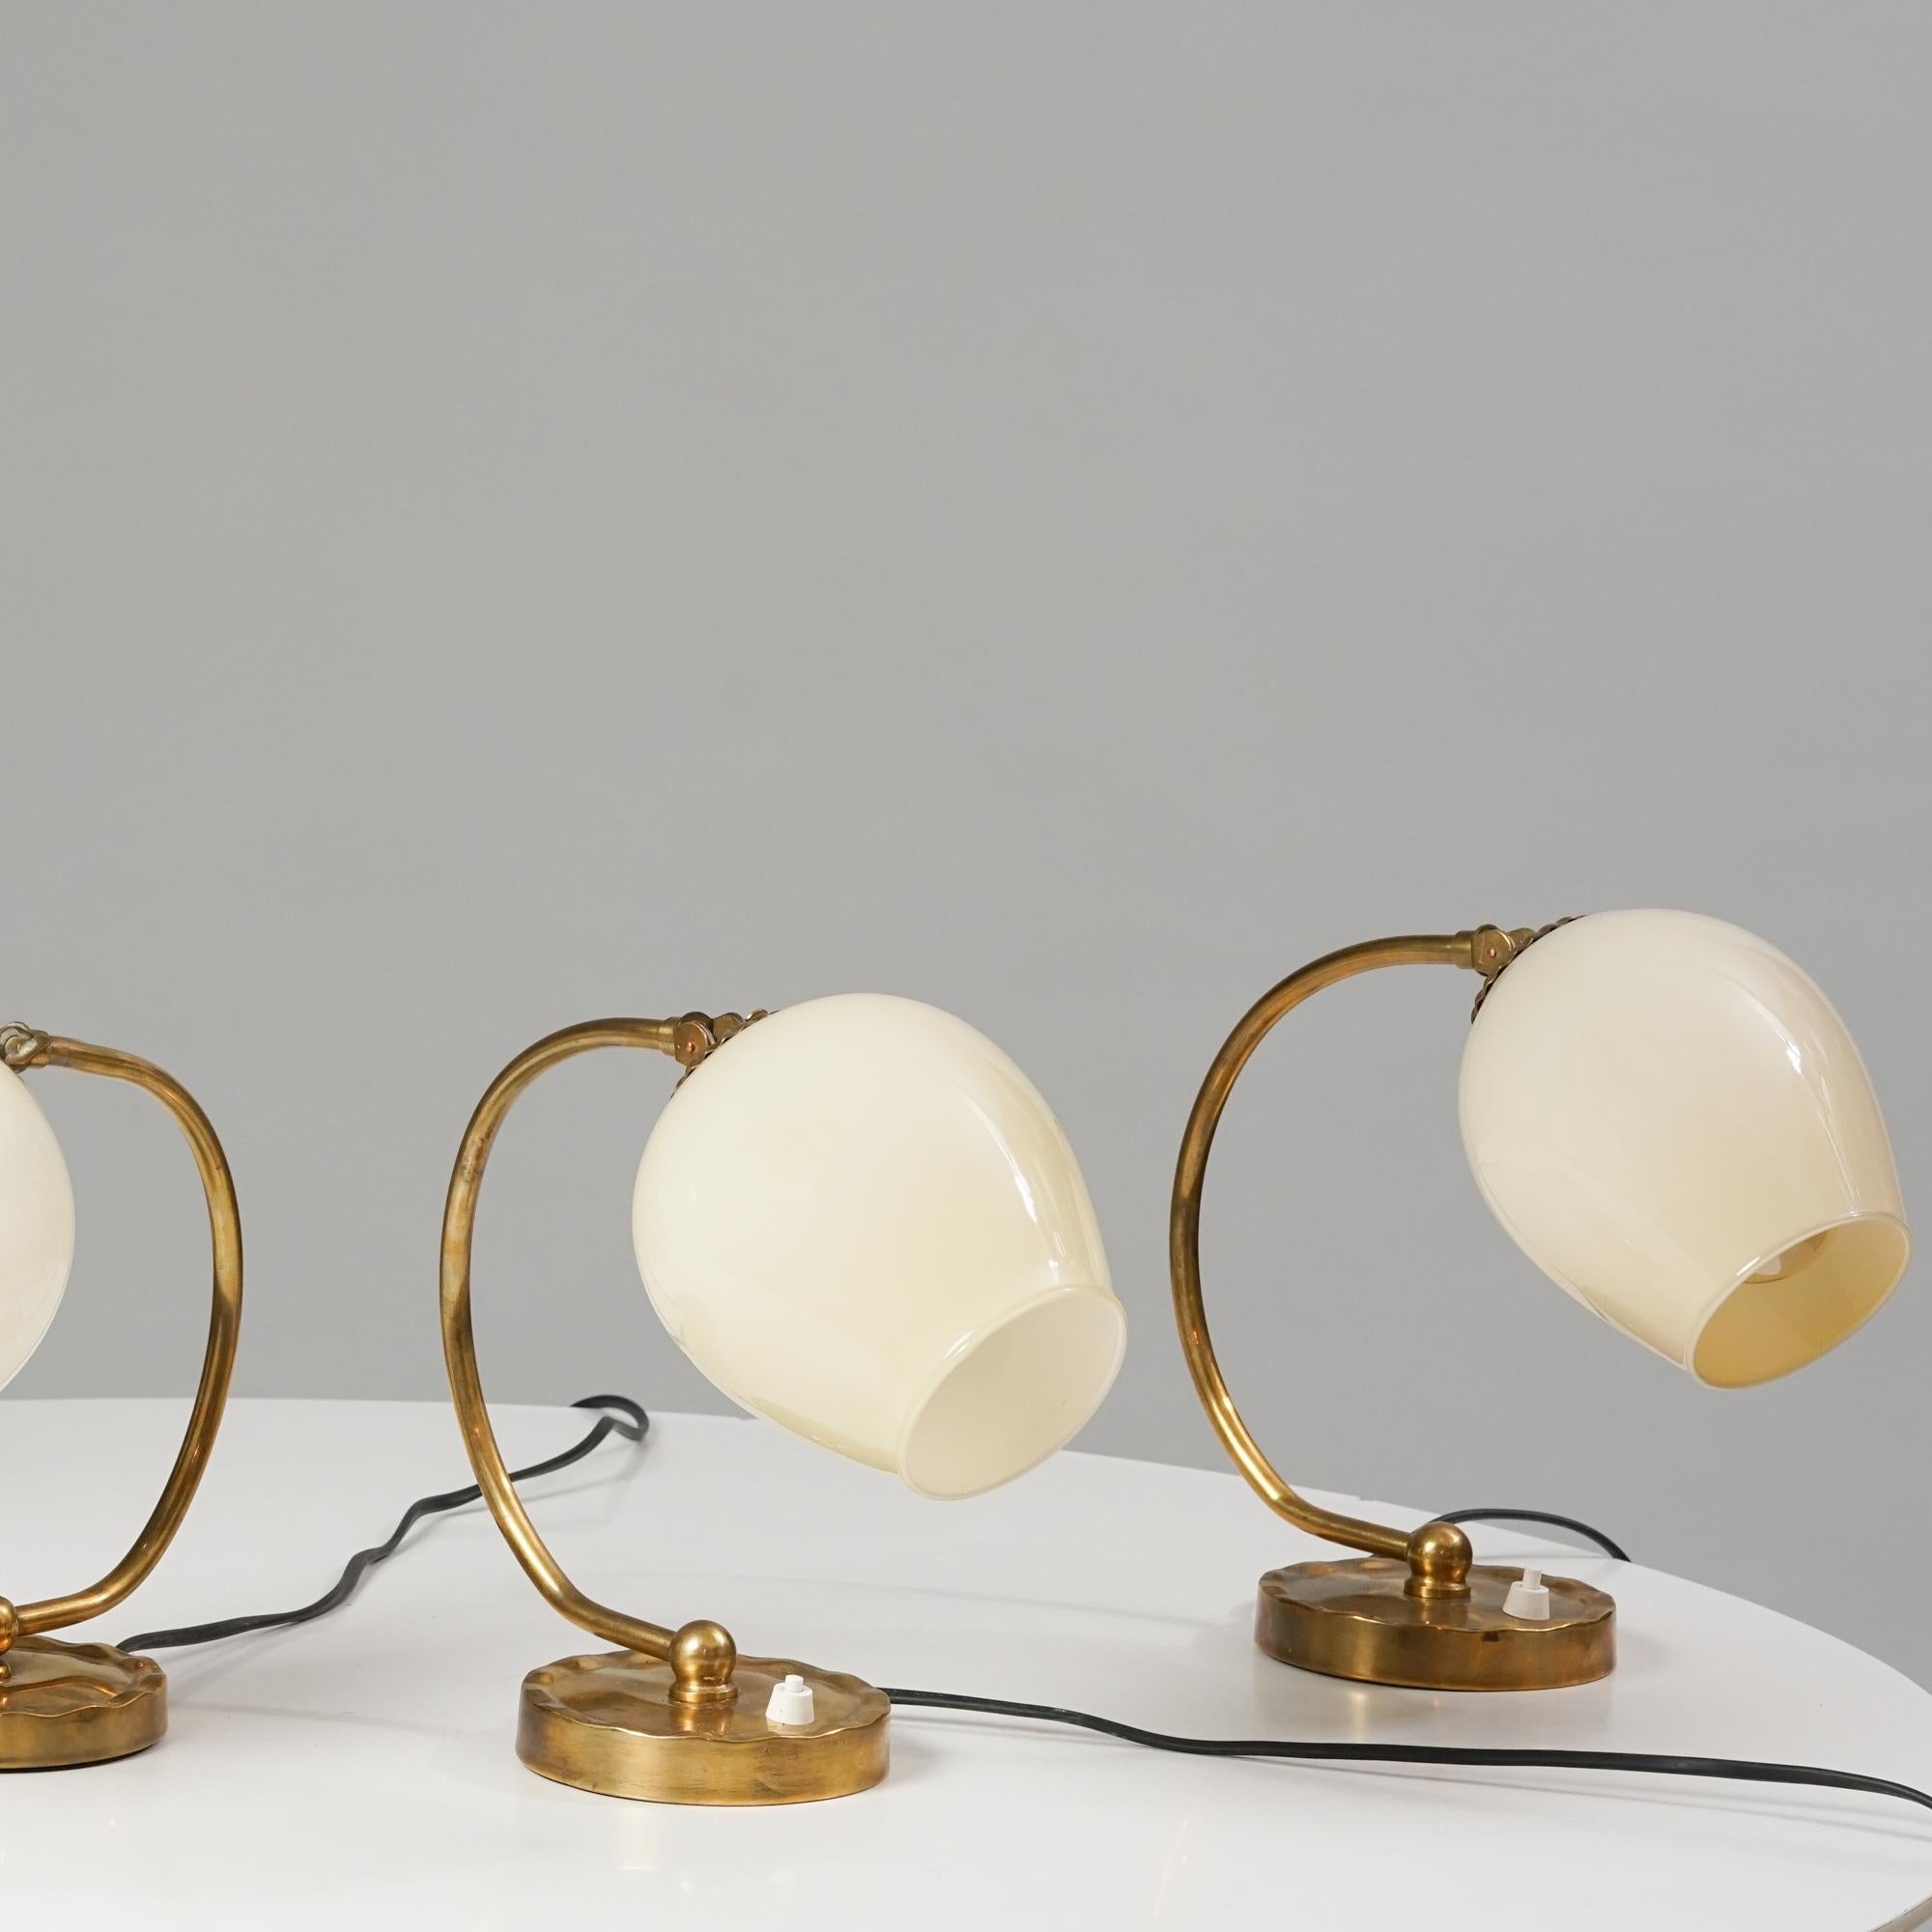 Brass Paavo Tynell Table-/ Wall Light Set Model 61032, Idman, 1950s For Sale